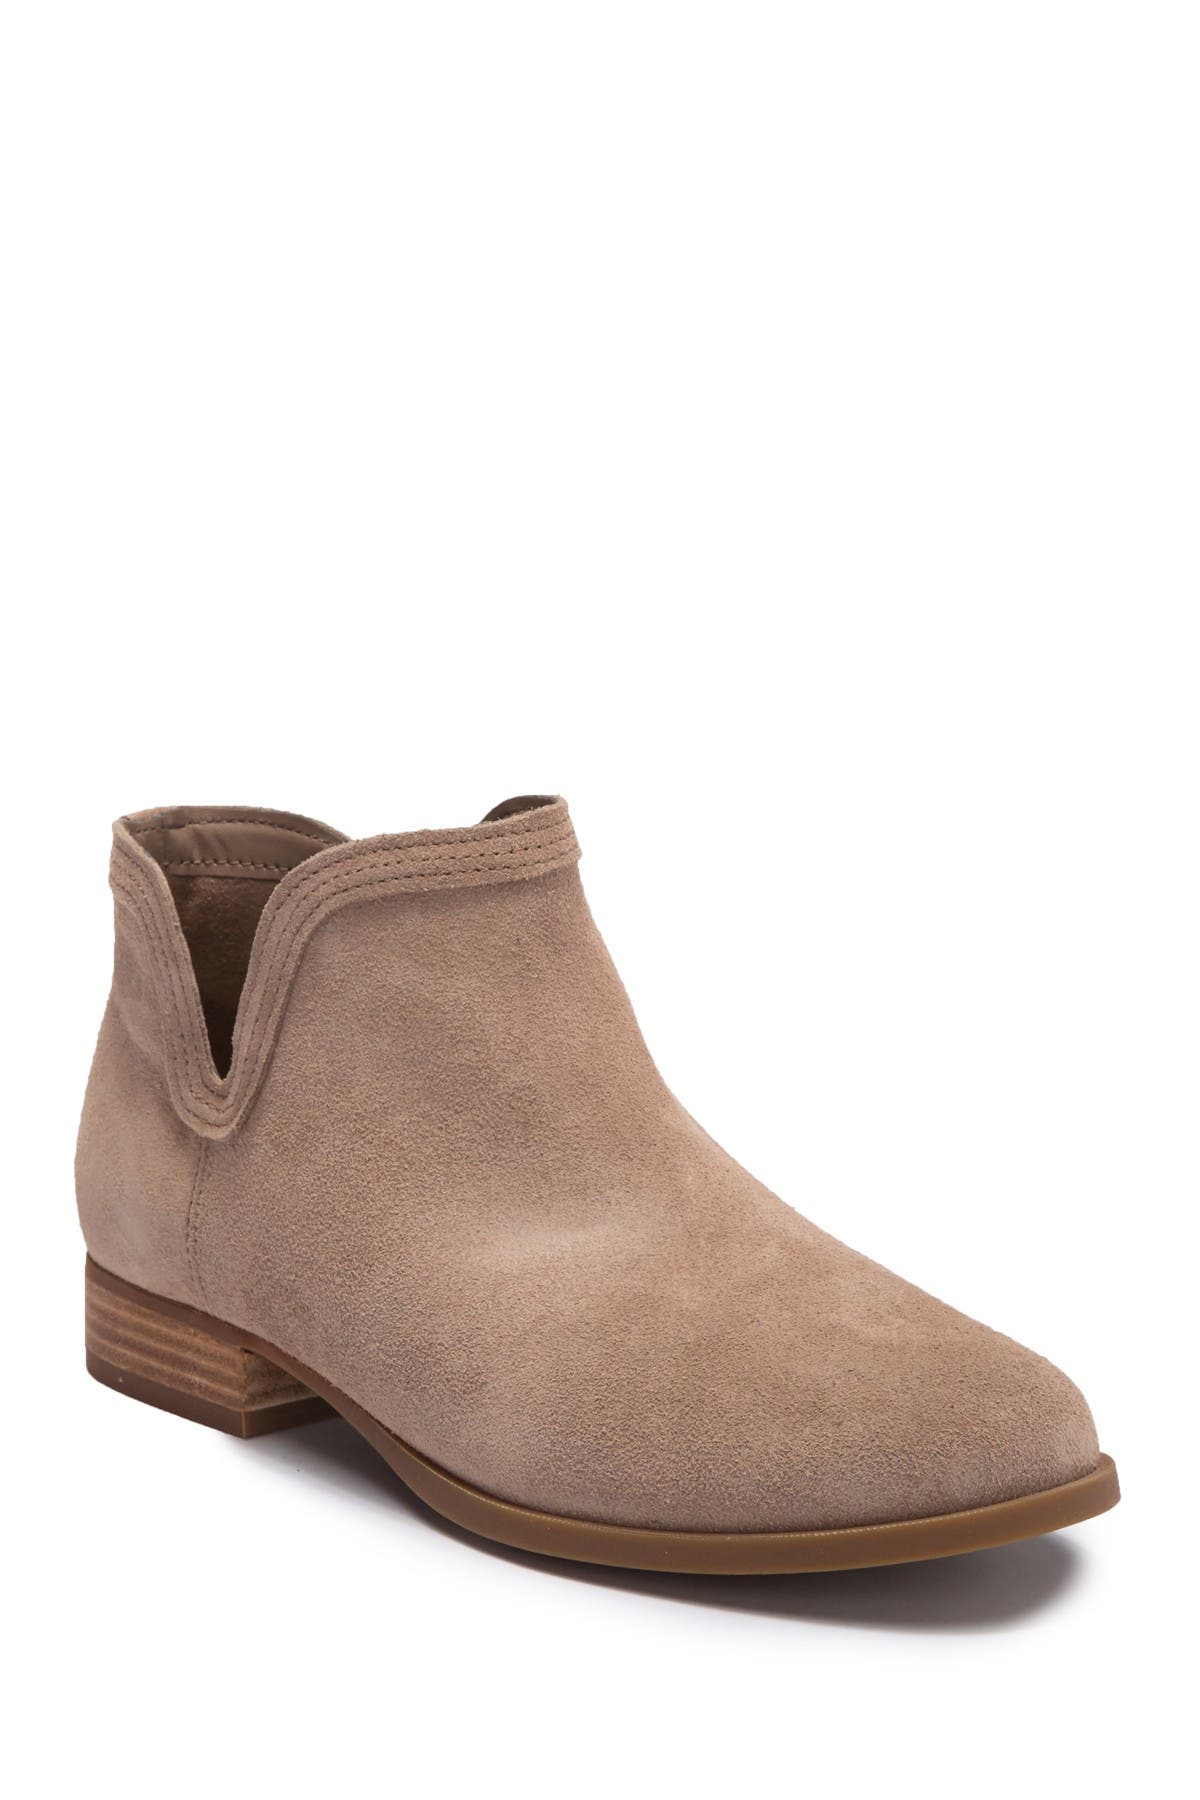 Cheyanna Suede Ankle Bootie 